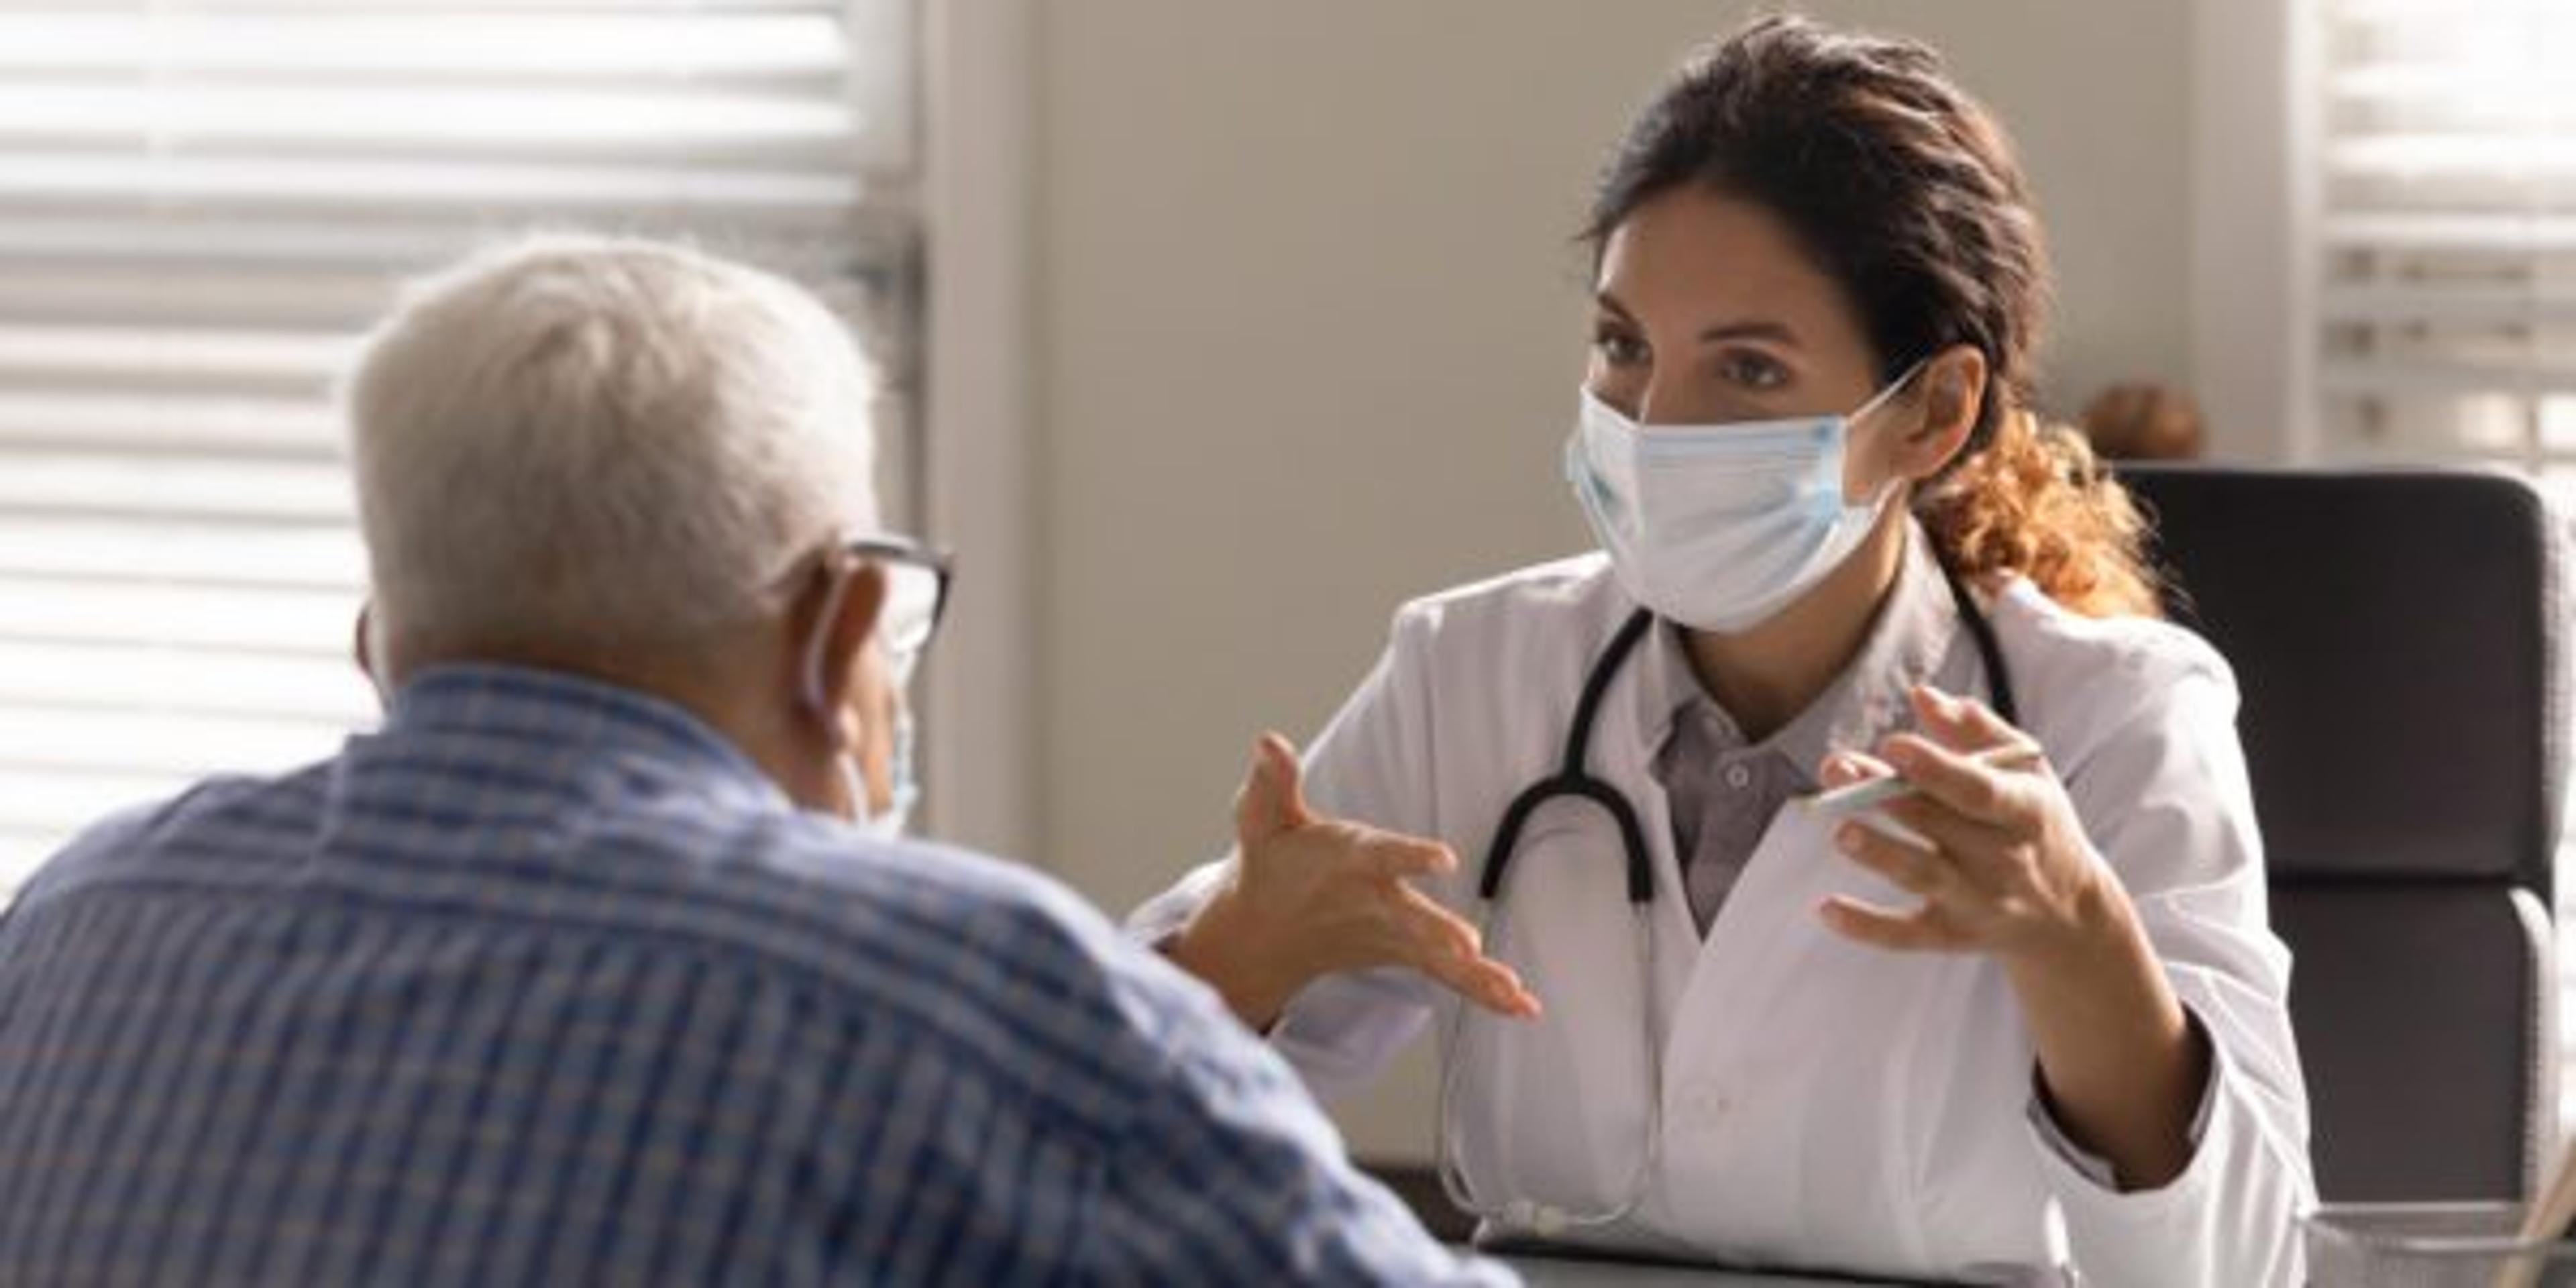 Female doctor wearing a mask speaks to a patient about colon health